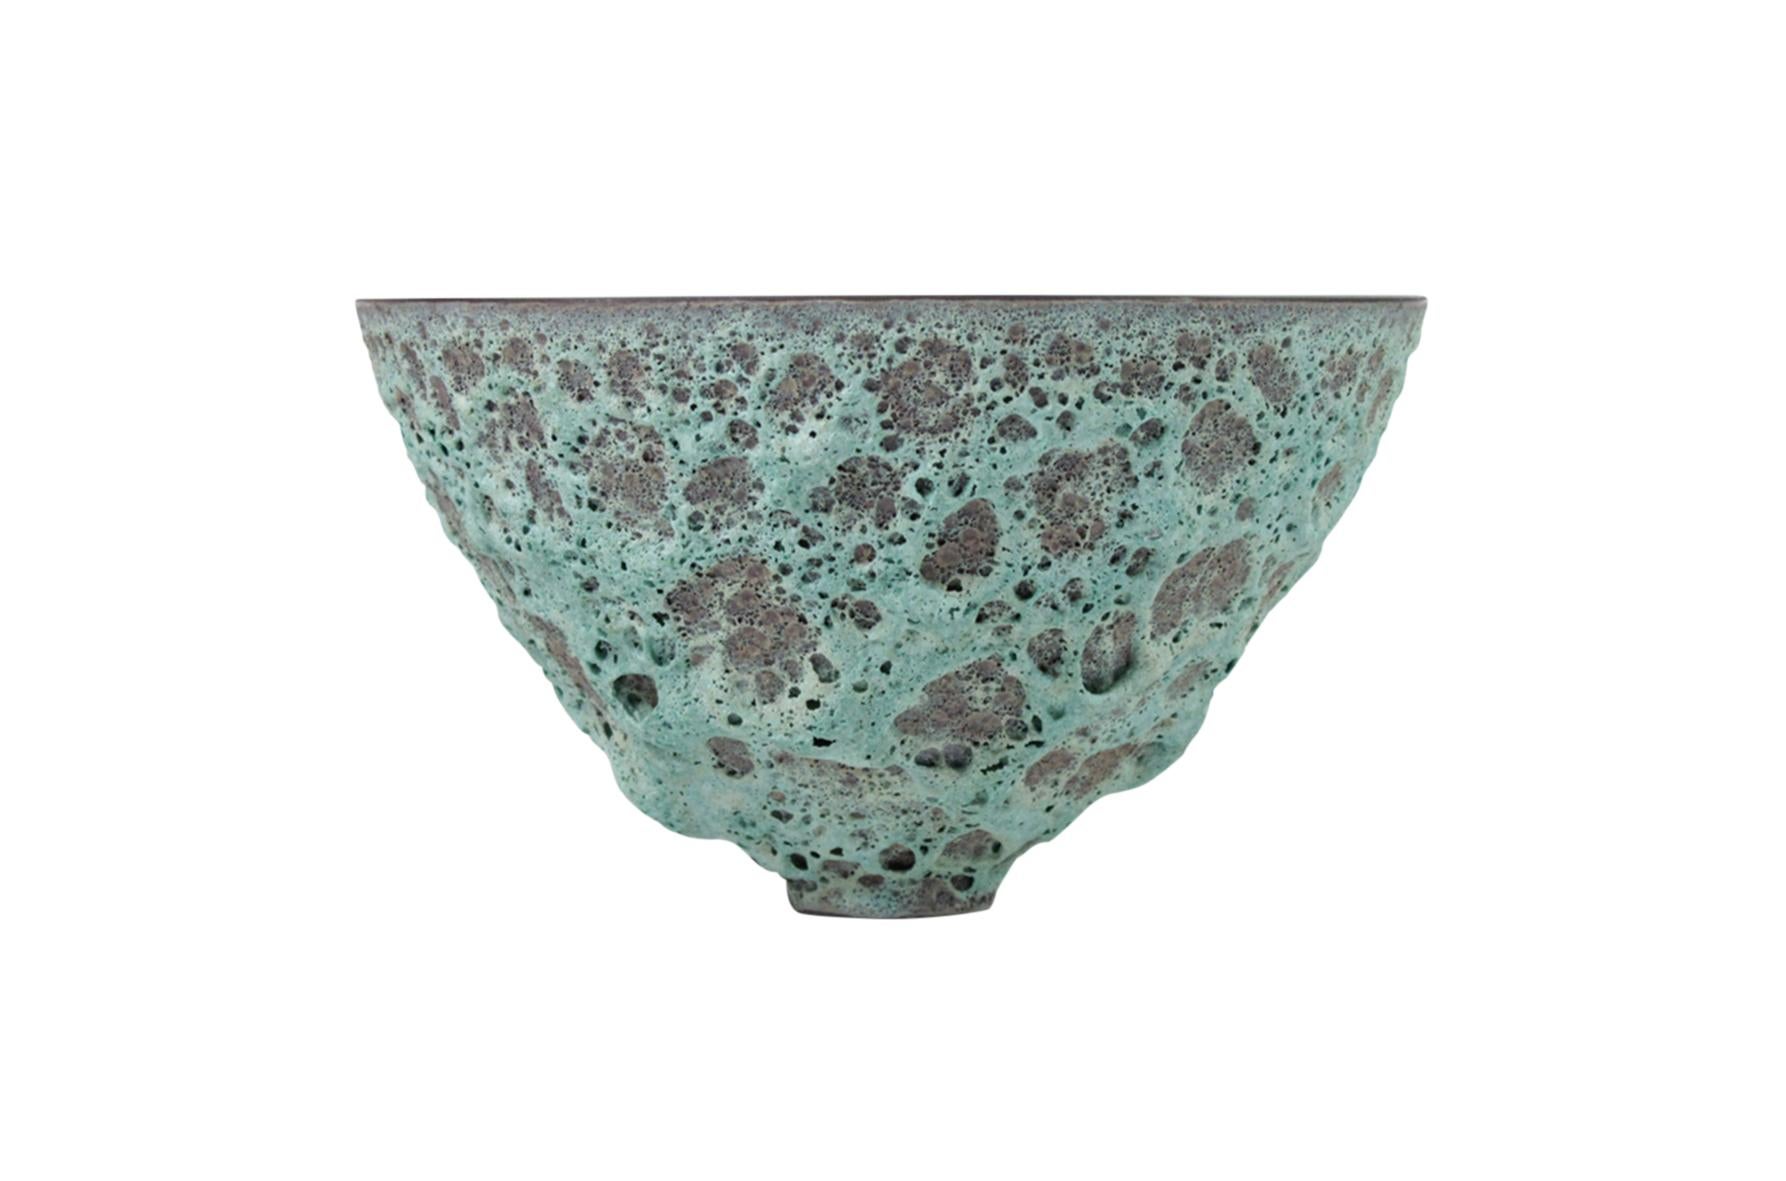 James Lovera large Studio Pottery bowl with deeply textured seafoam green lava glaze. Signed.